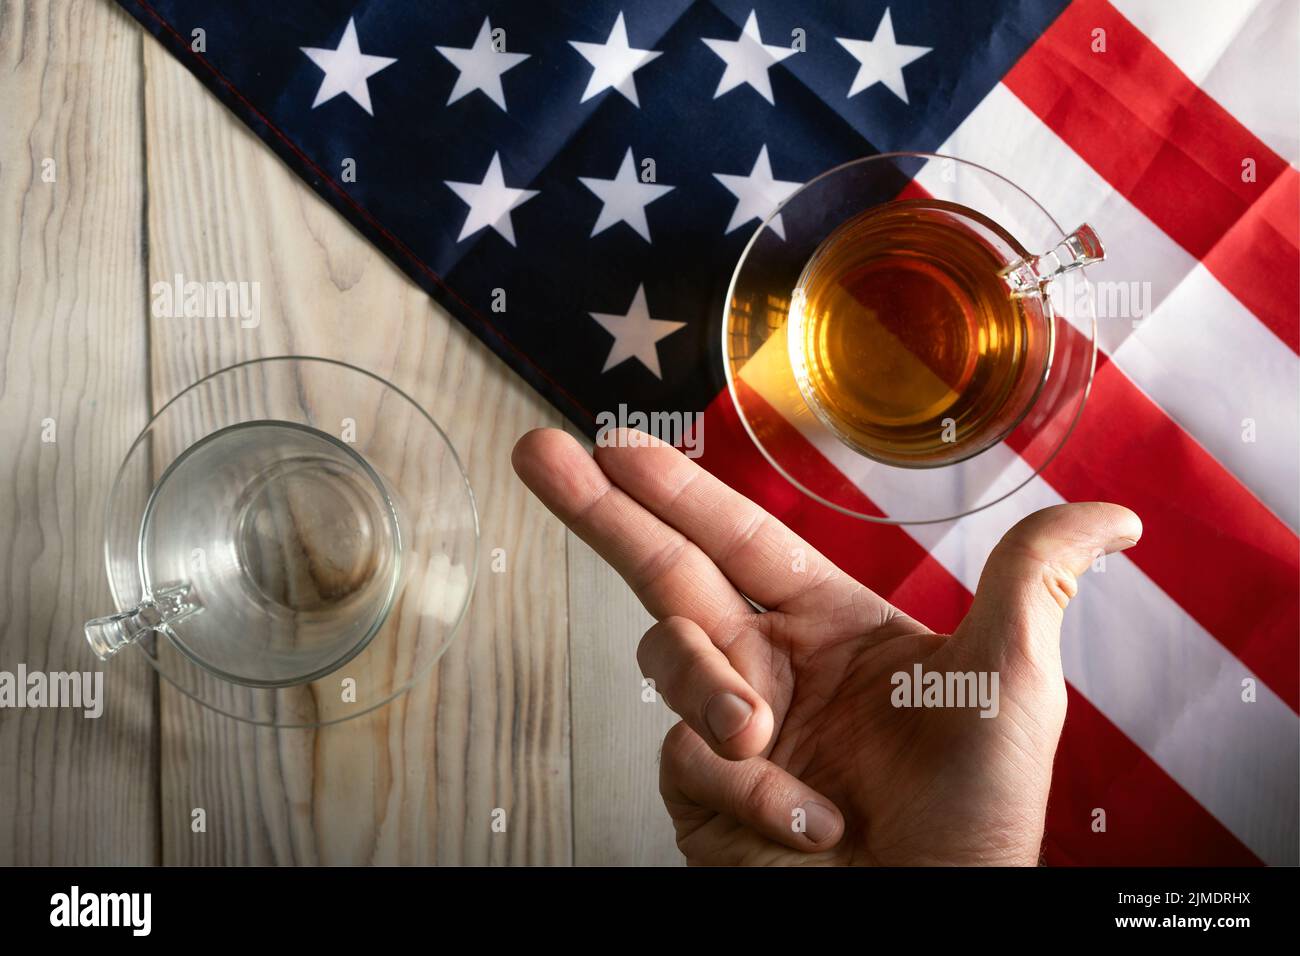 Table separated by American flag with full cup and empty cup on table and man's hand in V position Stock Photo